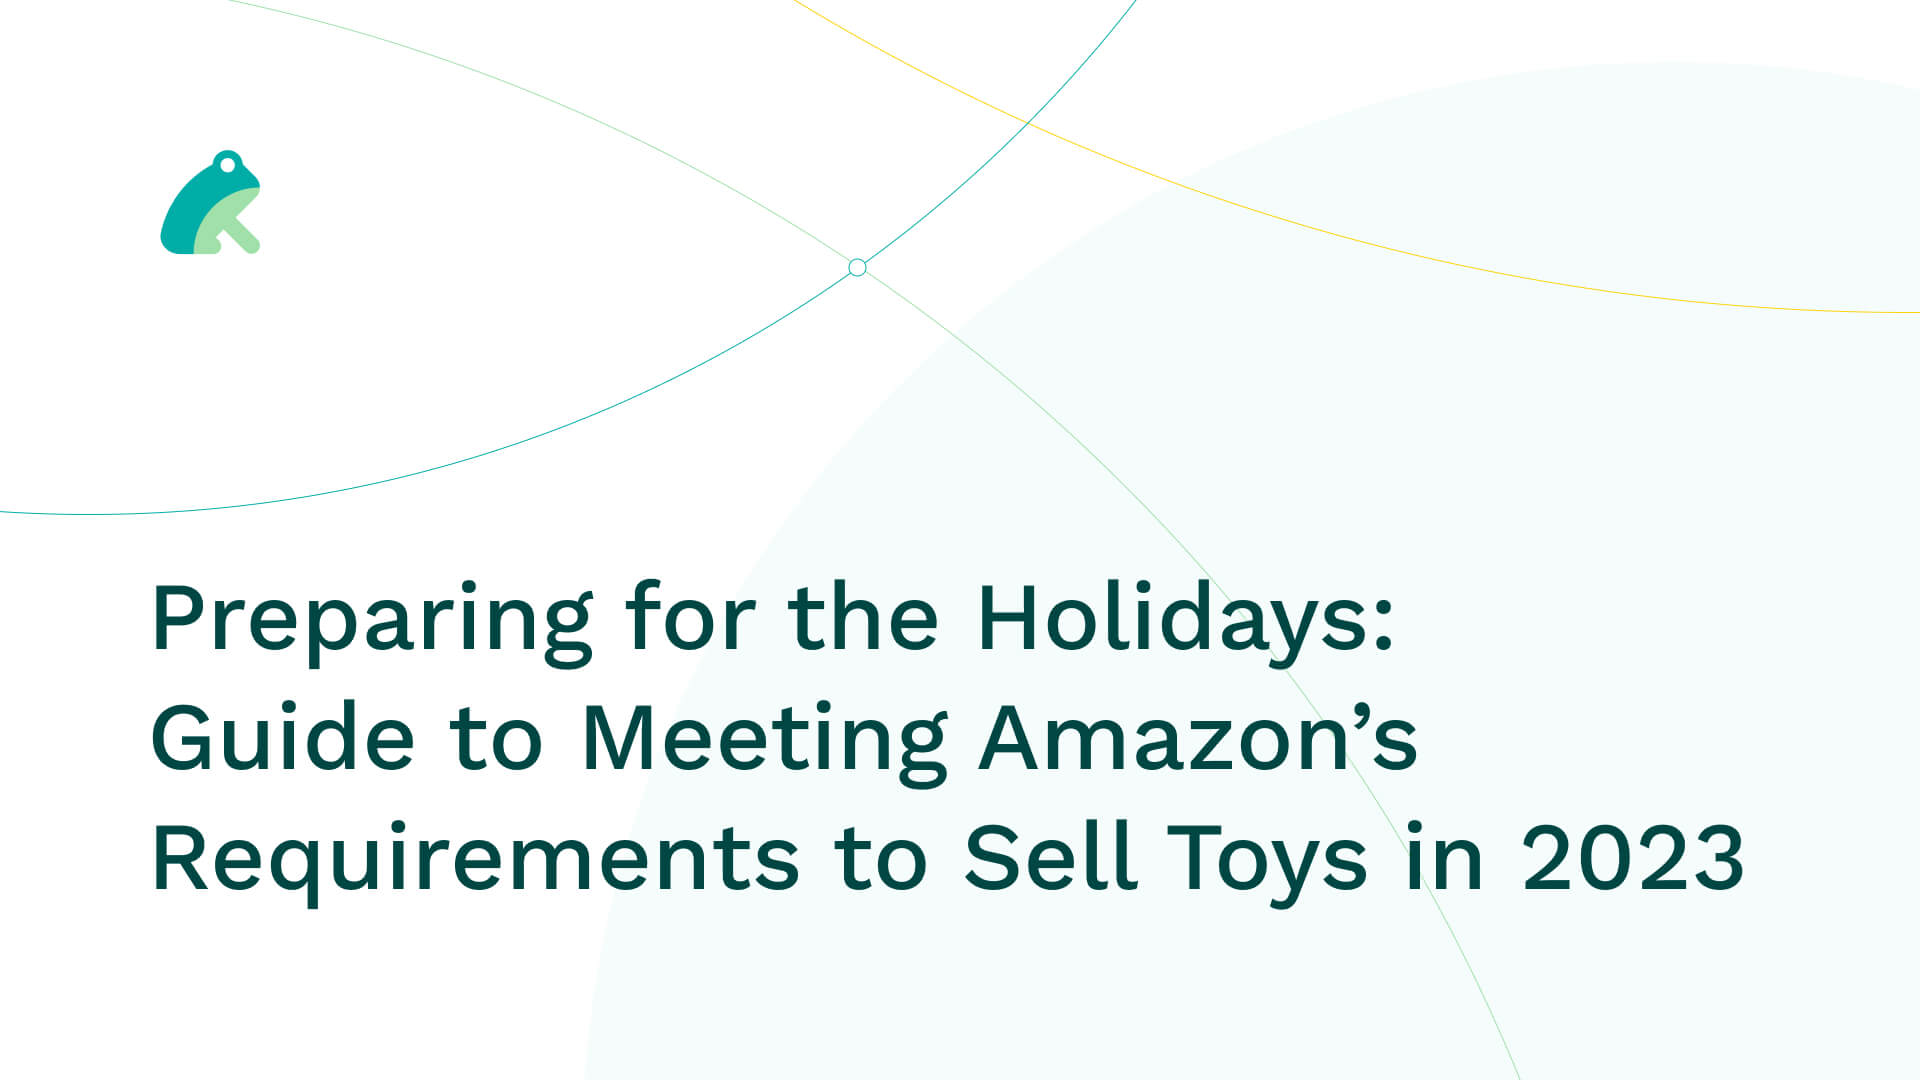 Preparing for the Holidays: Guide to Meeting Amazon’s Requirements to Sell Toys in 2023